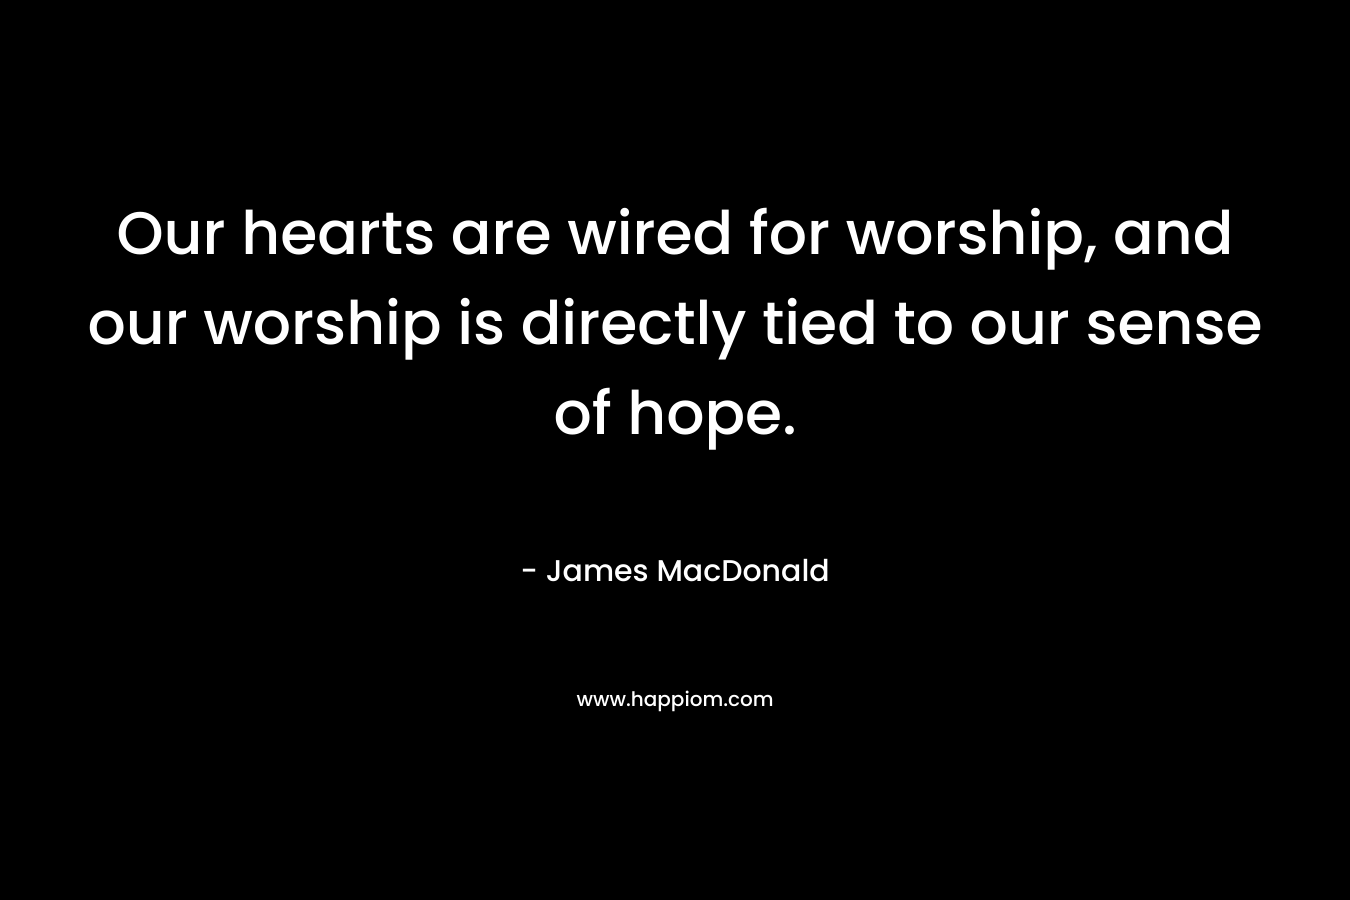 Our hearts are wired for worship, and our worship is directly tied to our sense of hope.